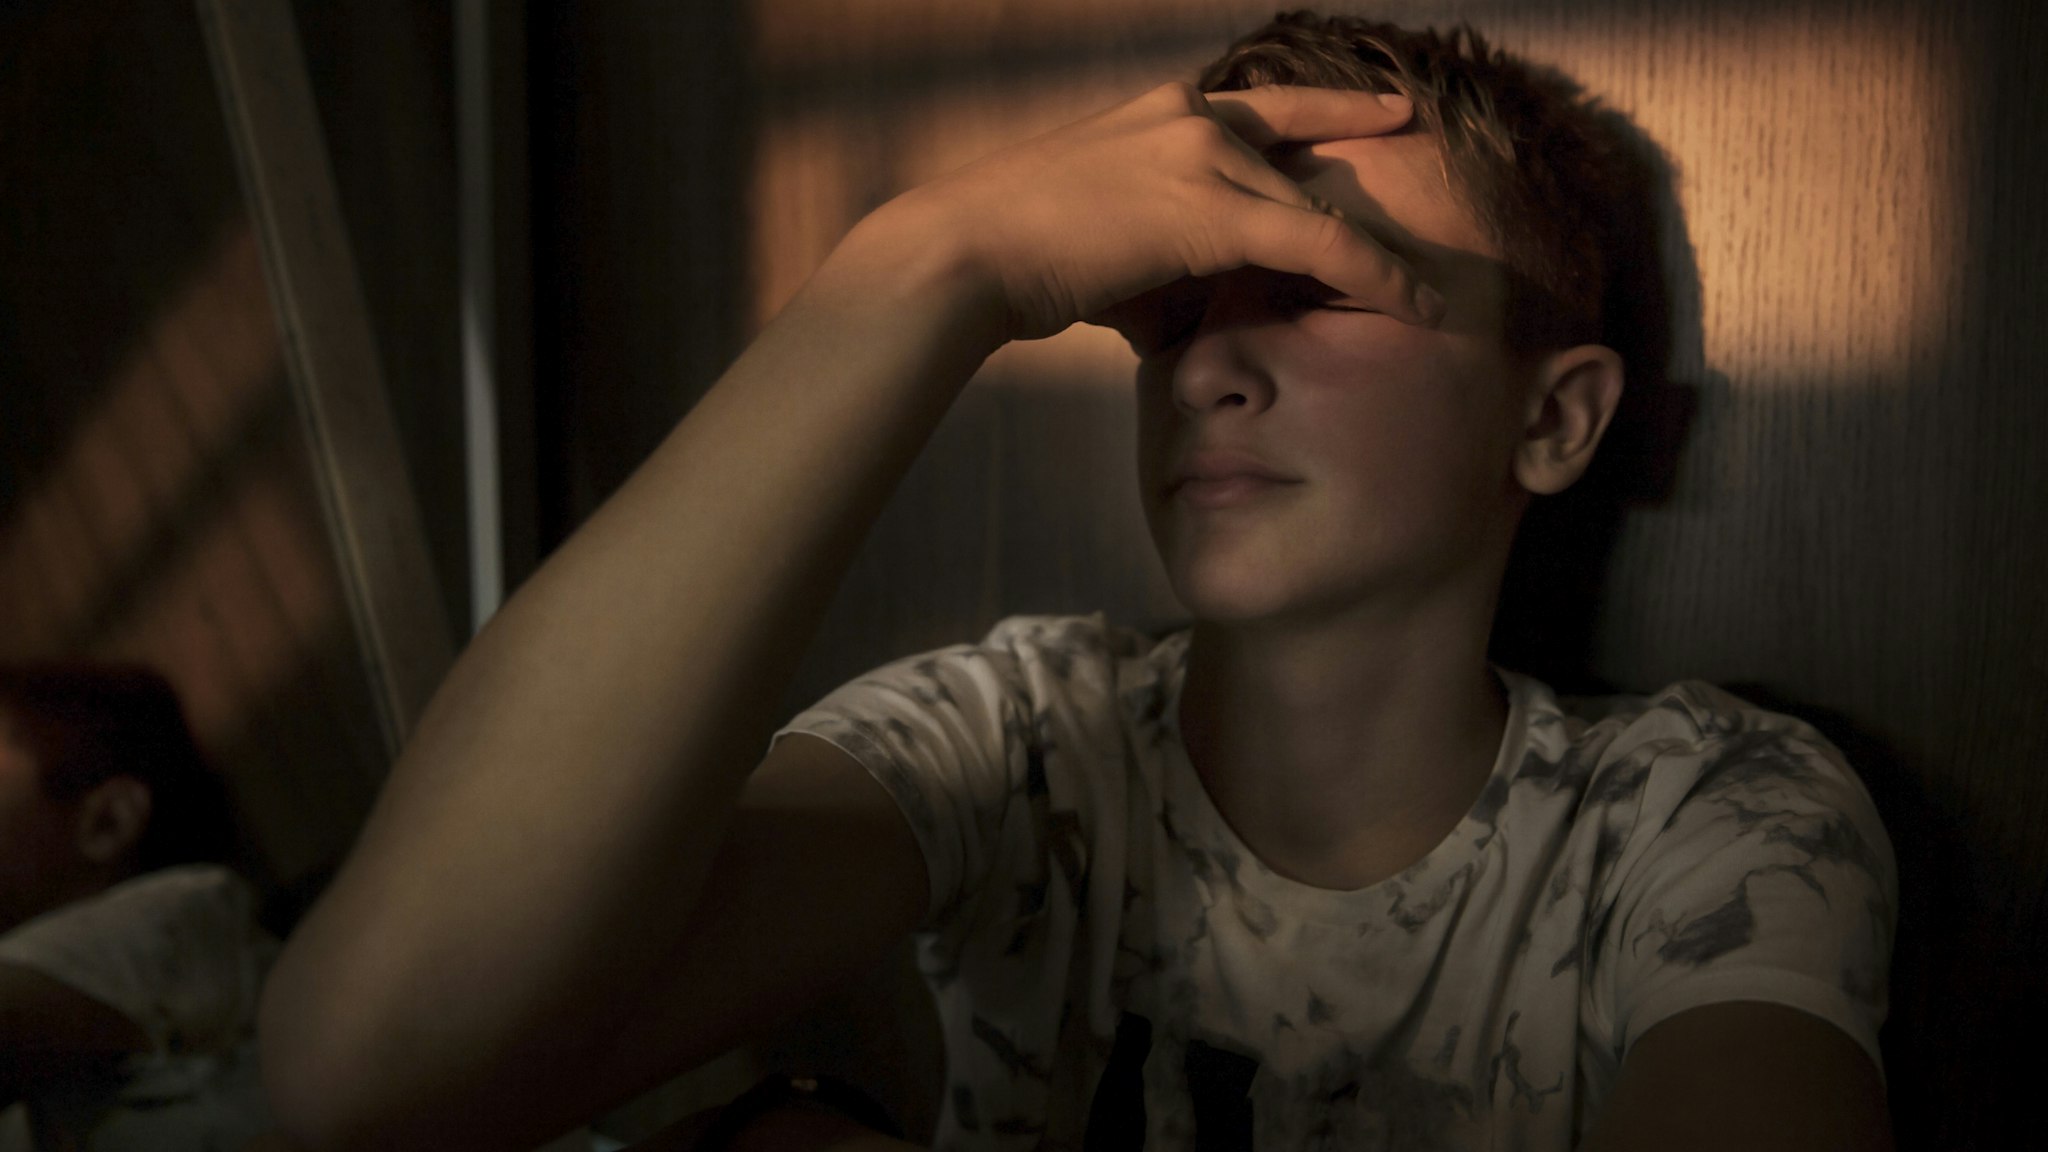 portrait of a teenager boy sitting in the dark room, with a beam of light over his eyes